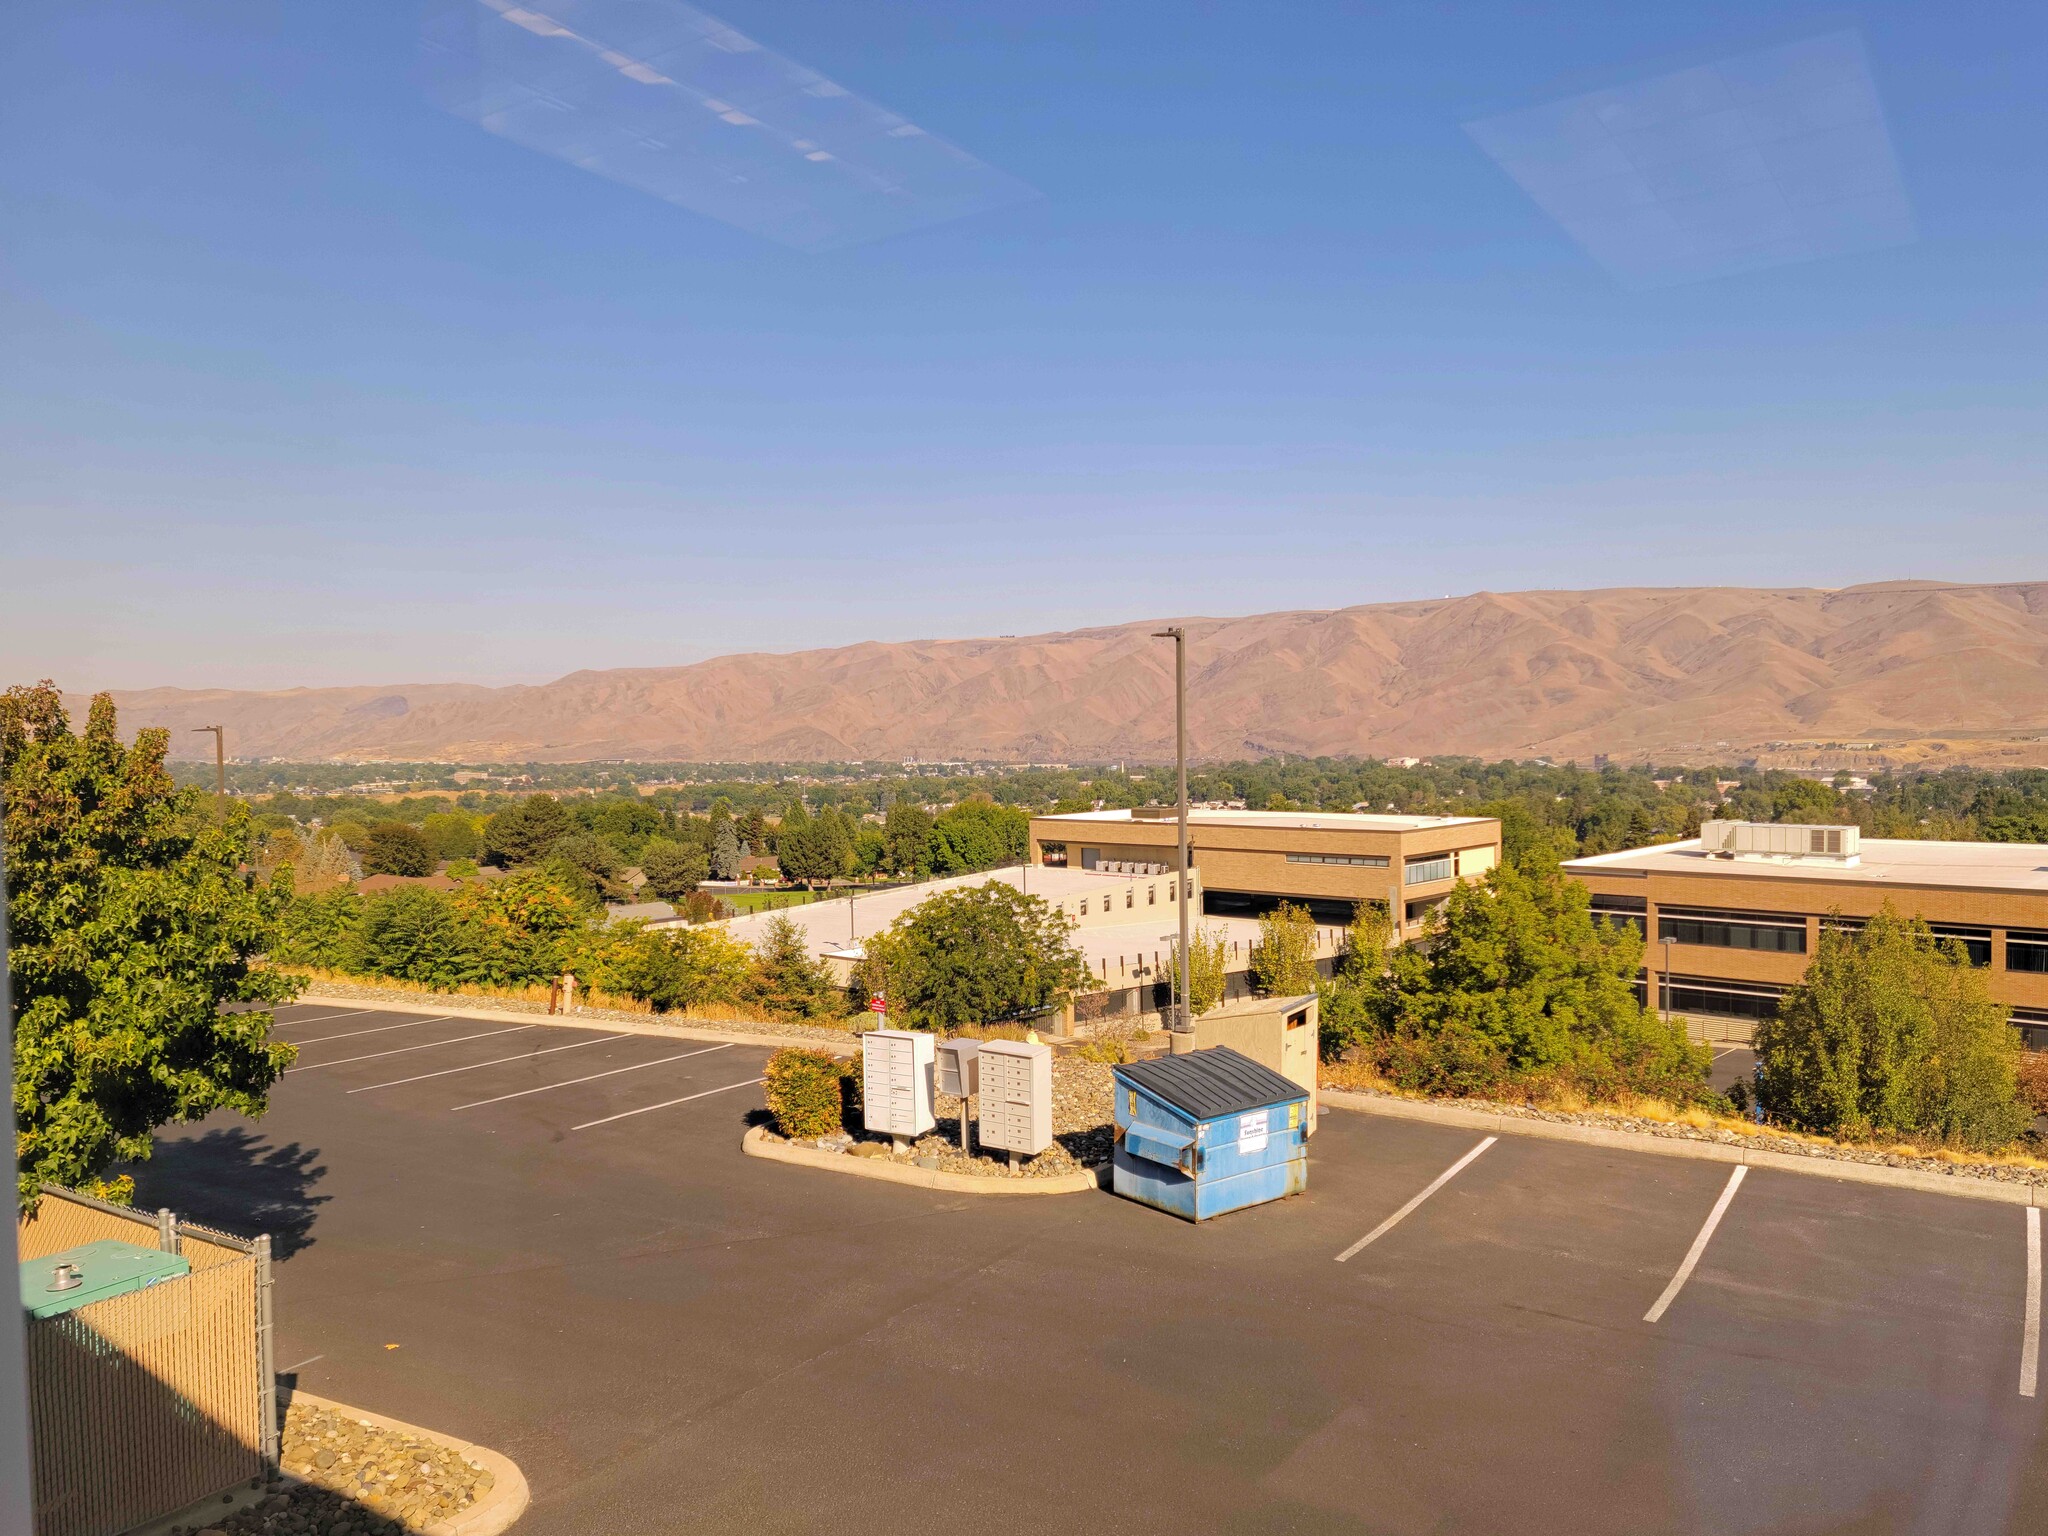 6.46 Cap Single Tenant Medical Office - 3.5% Annual Increases: Incredible views of valley